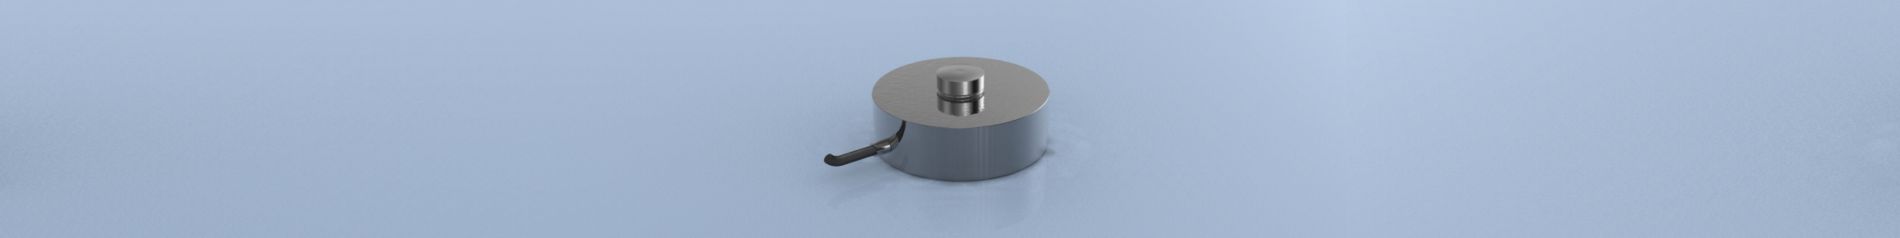 CDIT-1 Low Profile Compression Load Cell